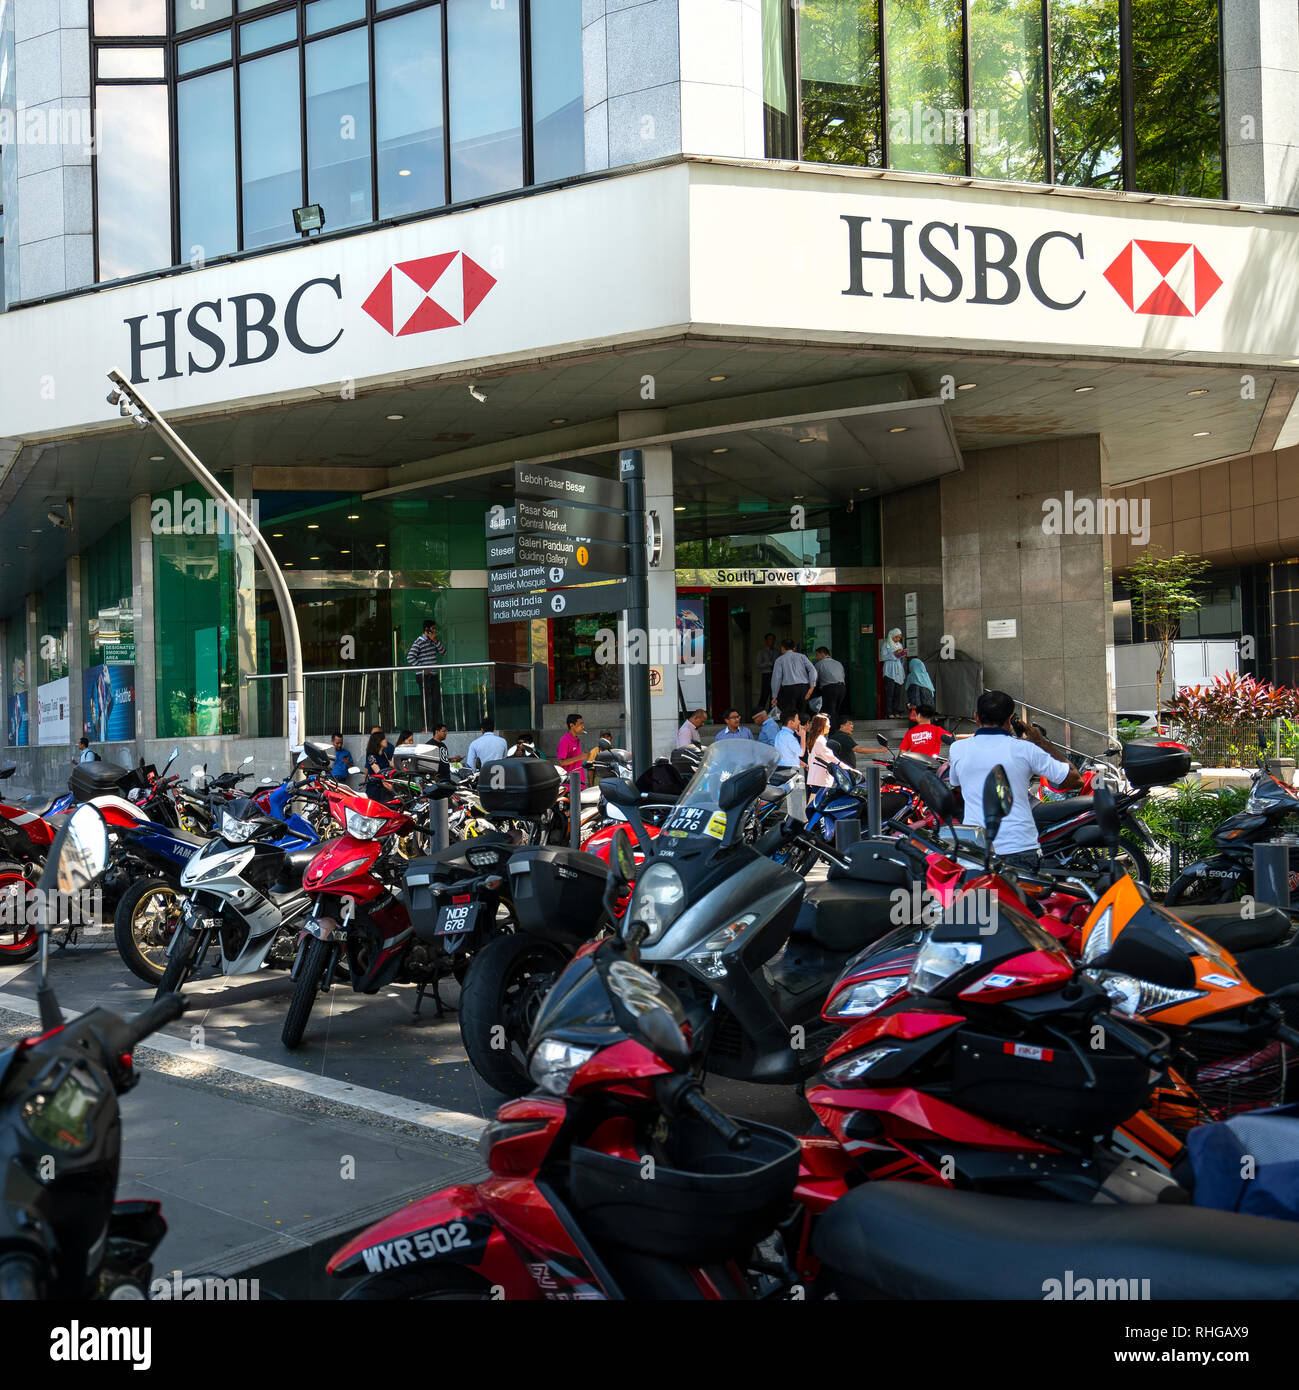 A view of the HSBC Bank headquarters building in Kuala Lumpur, Malaysia Stock Photo